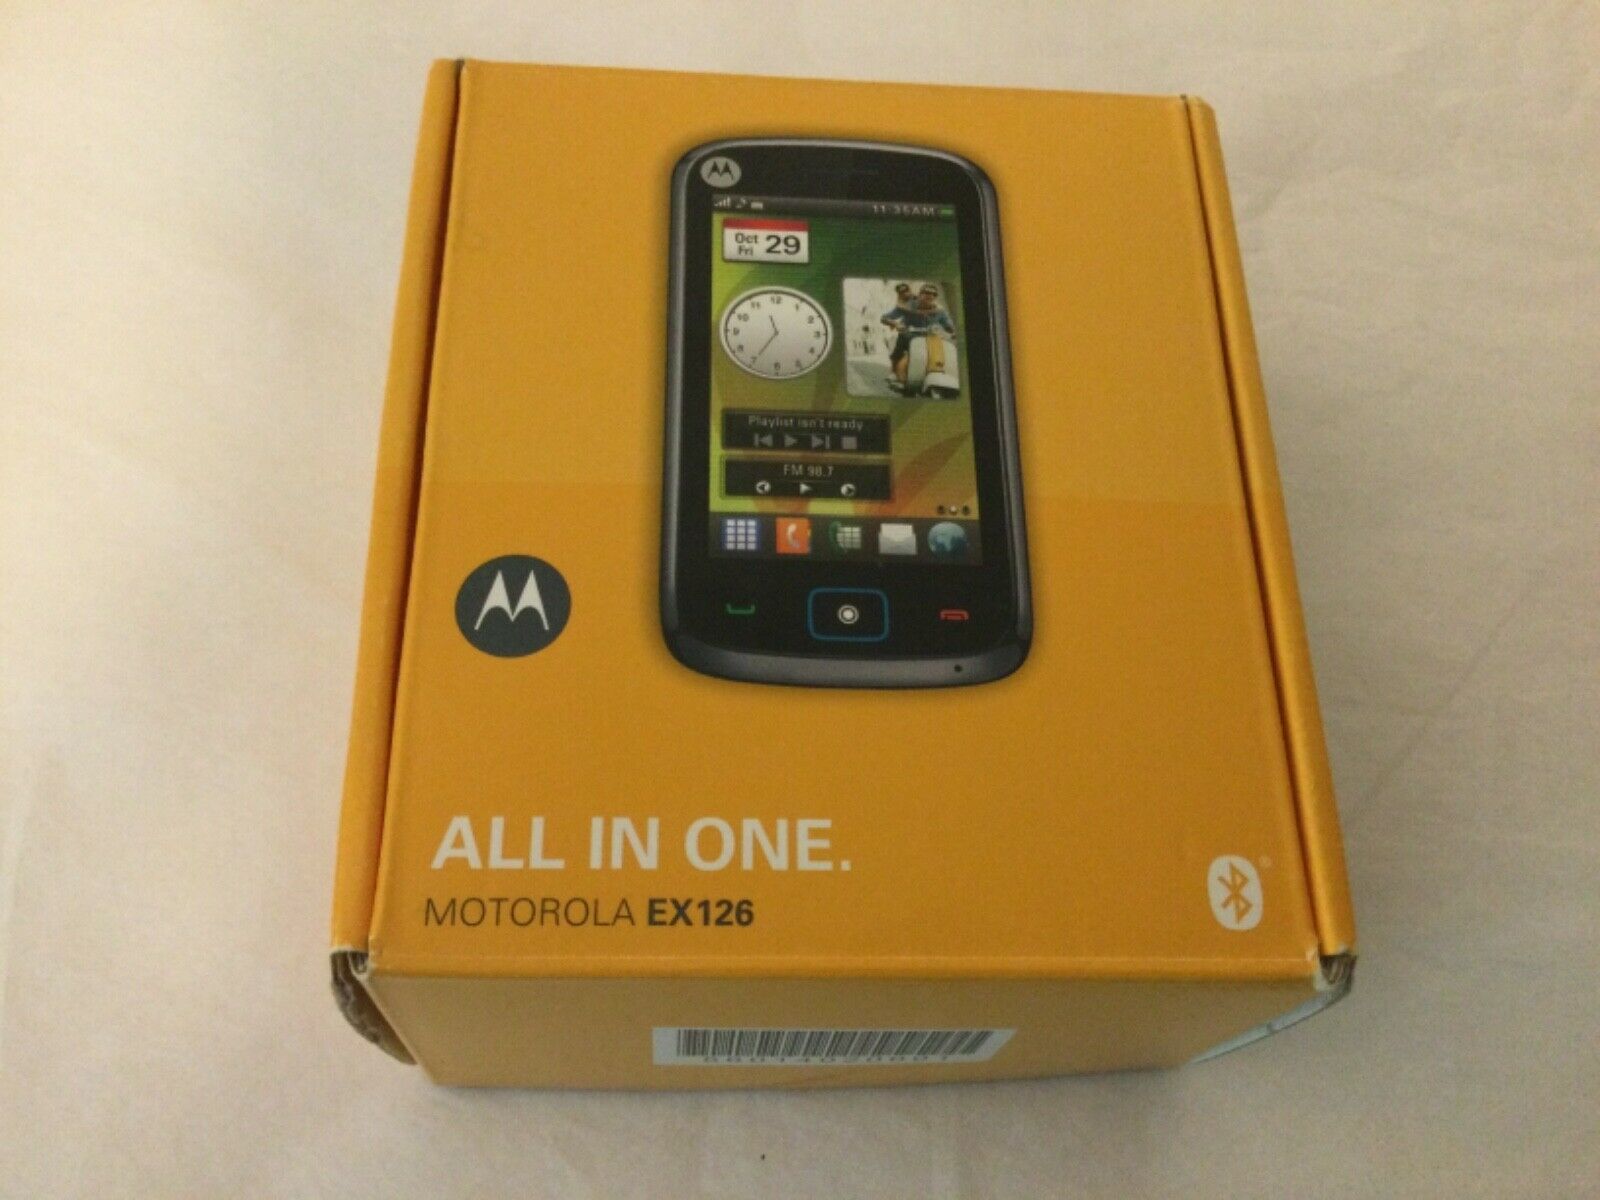 Motorola Ex 126 Cell Phone With Original Box, Battery, Instructions, Charger